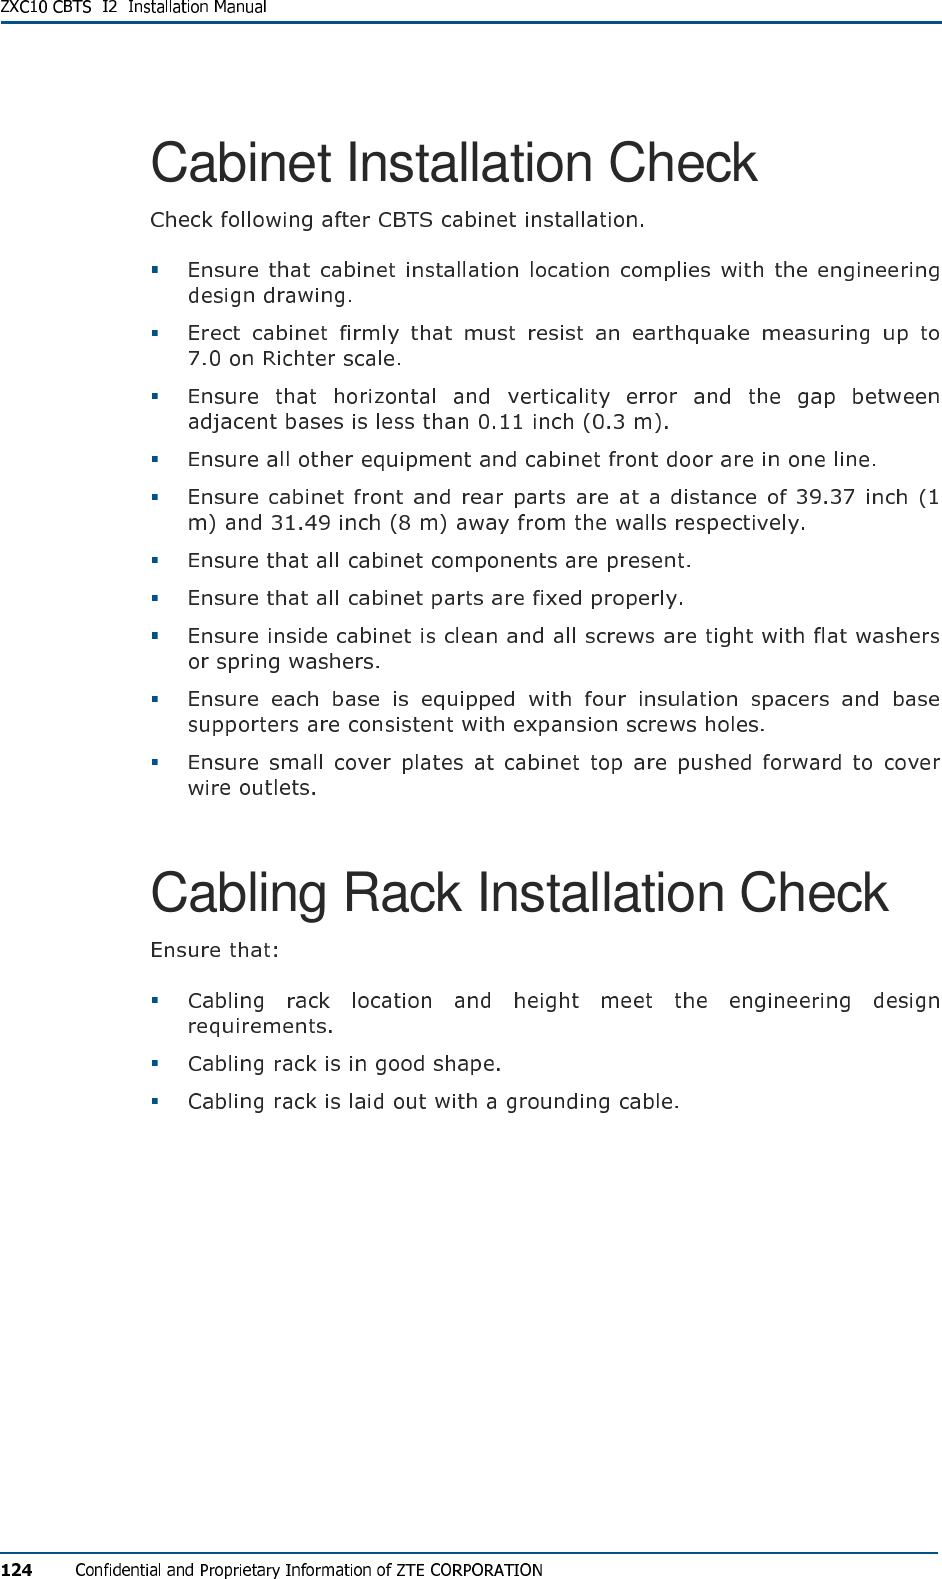 Cabinet Installation Check            Cabling Rack Installation Check    